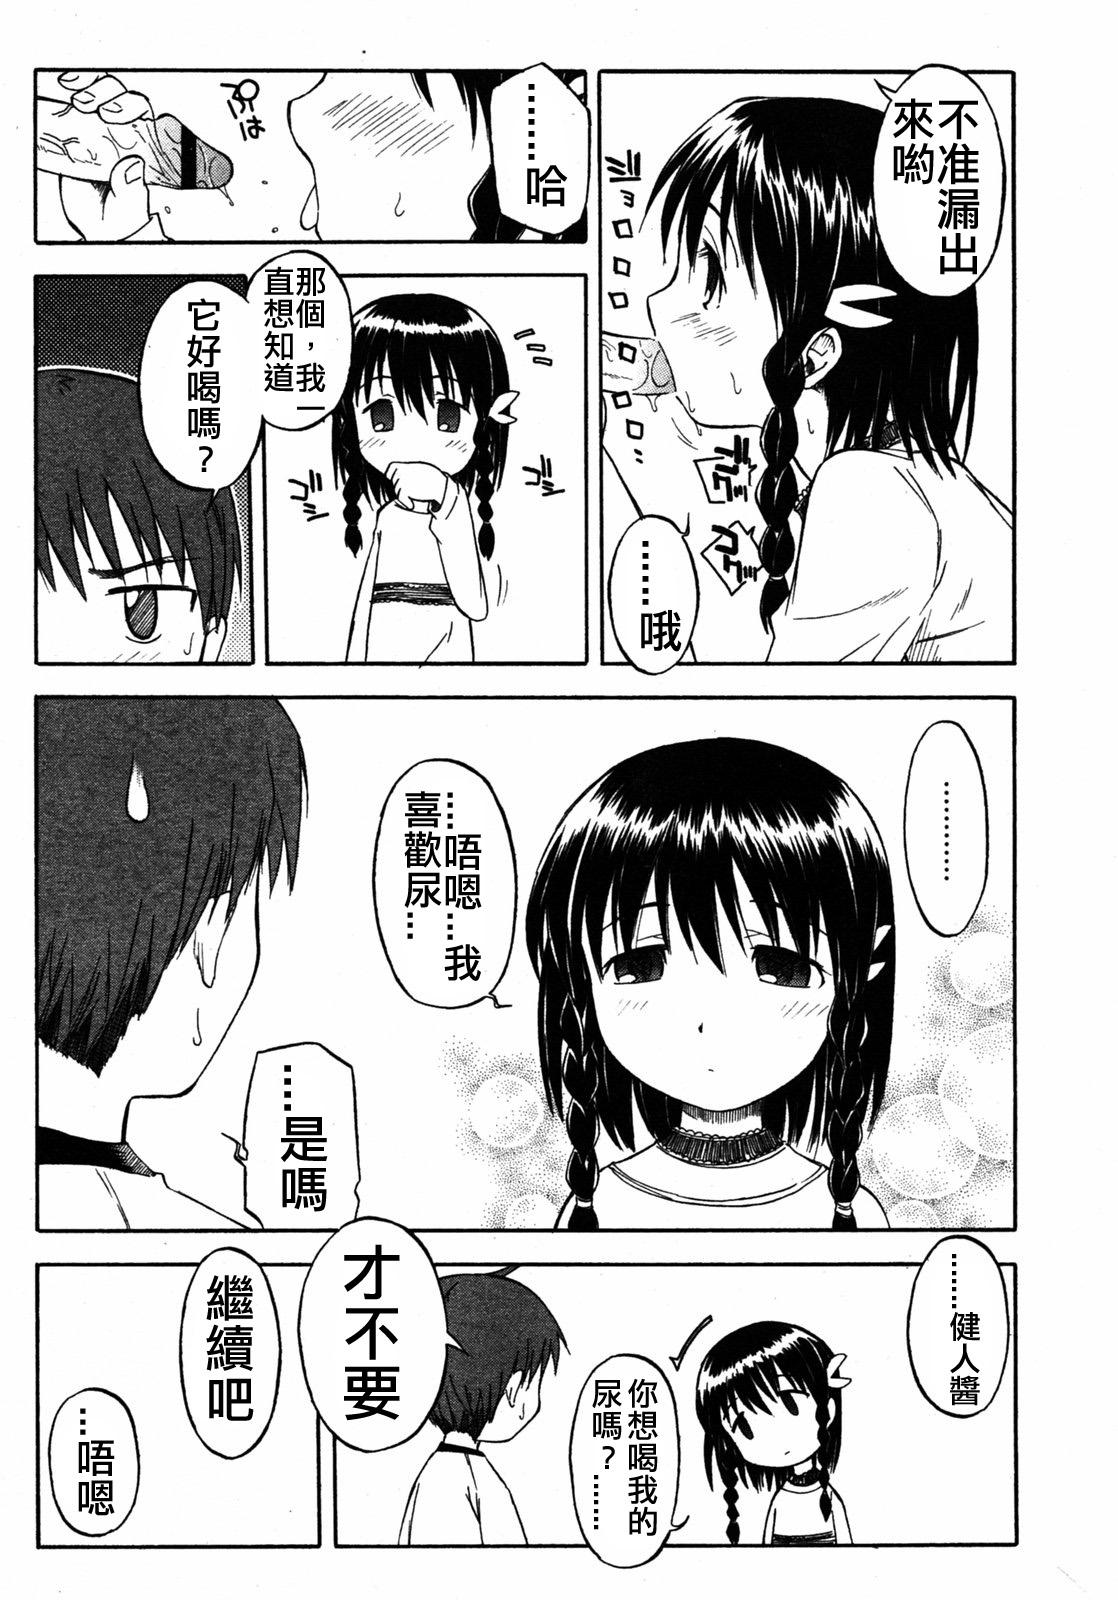 Rica Itsumo no Asobi | The Usual Play Free - Page 9